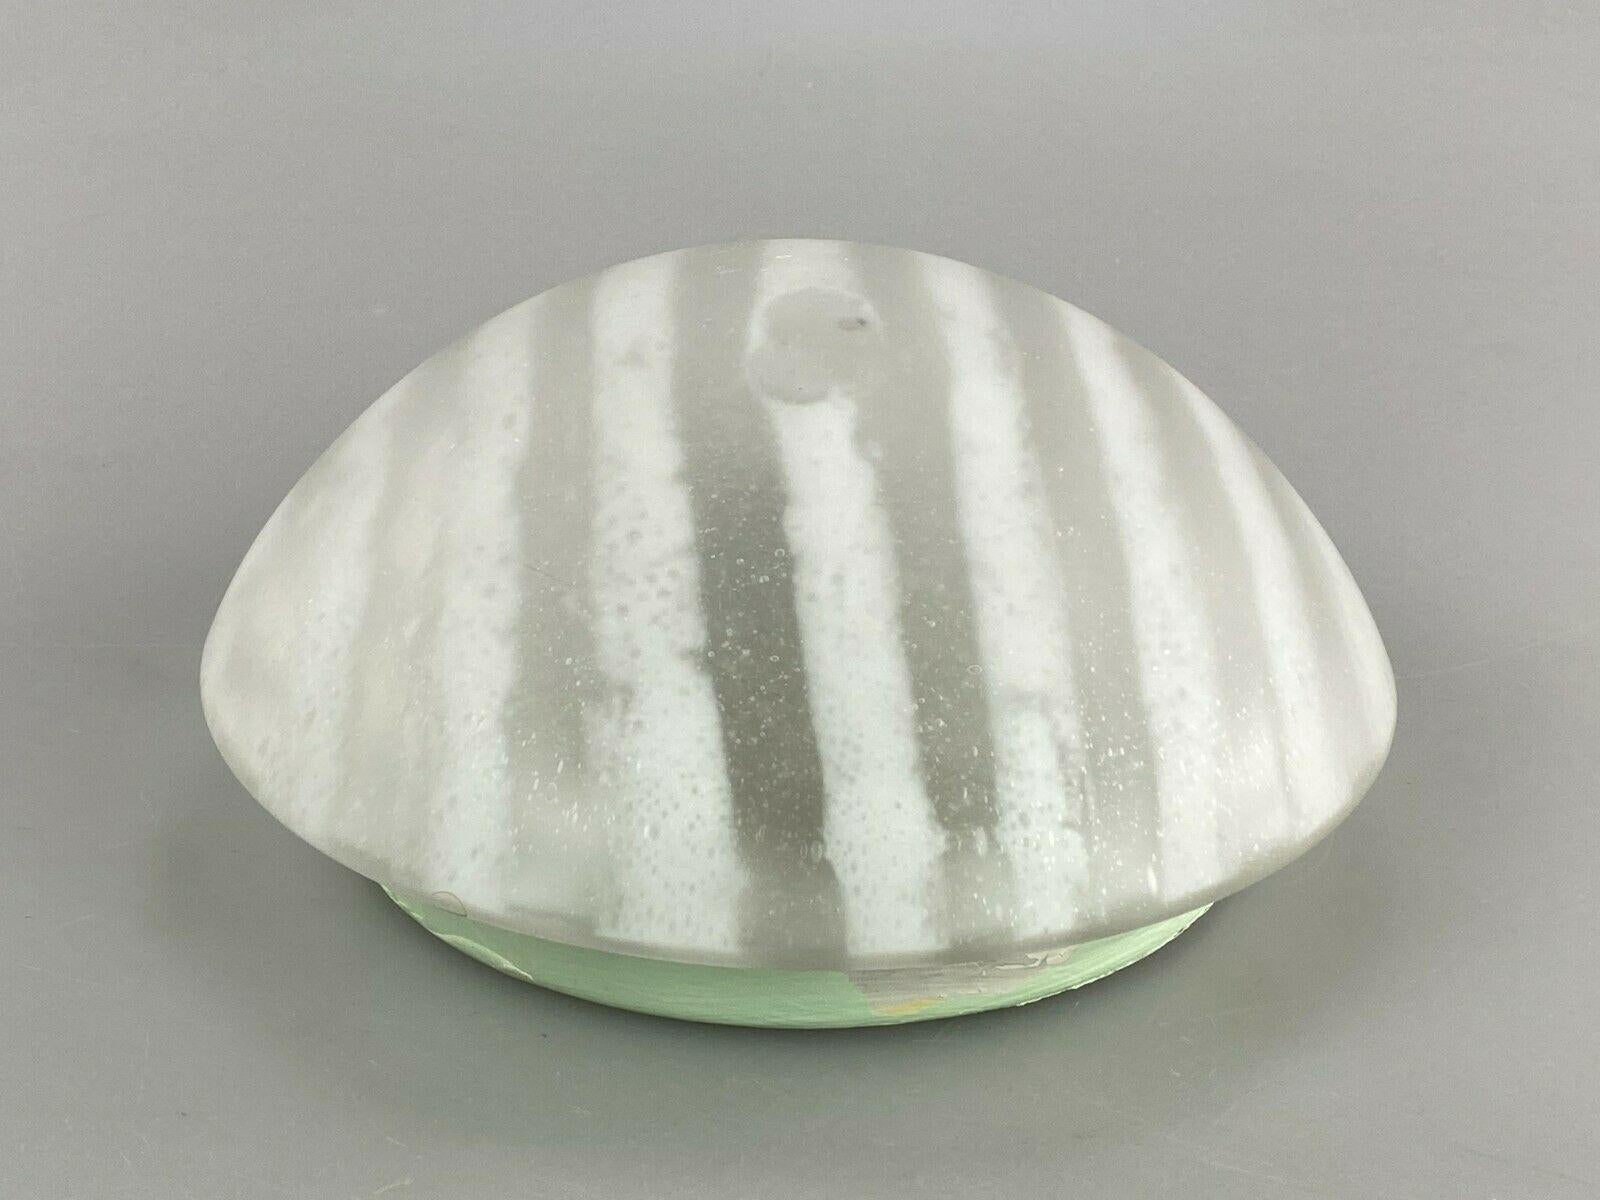 70s Peill & Putzler Plafoniere ceiling lamp glass space design lamp.

Object: lamp

Manufacturer: Peill & Putzler

Condition: good

Age: around 1960-1970

Dimensions:

Diameter = 22.5cm
Height = 10cm

Other notes:

The pictures